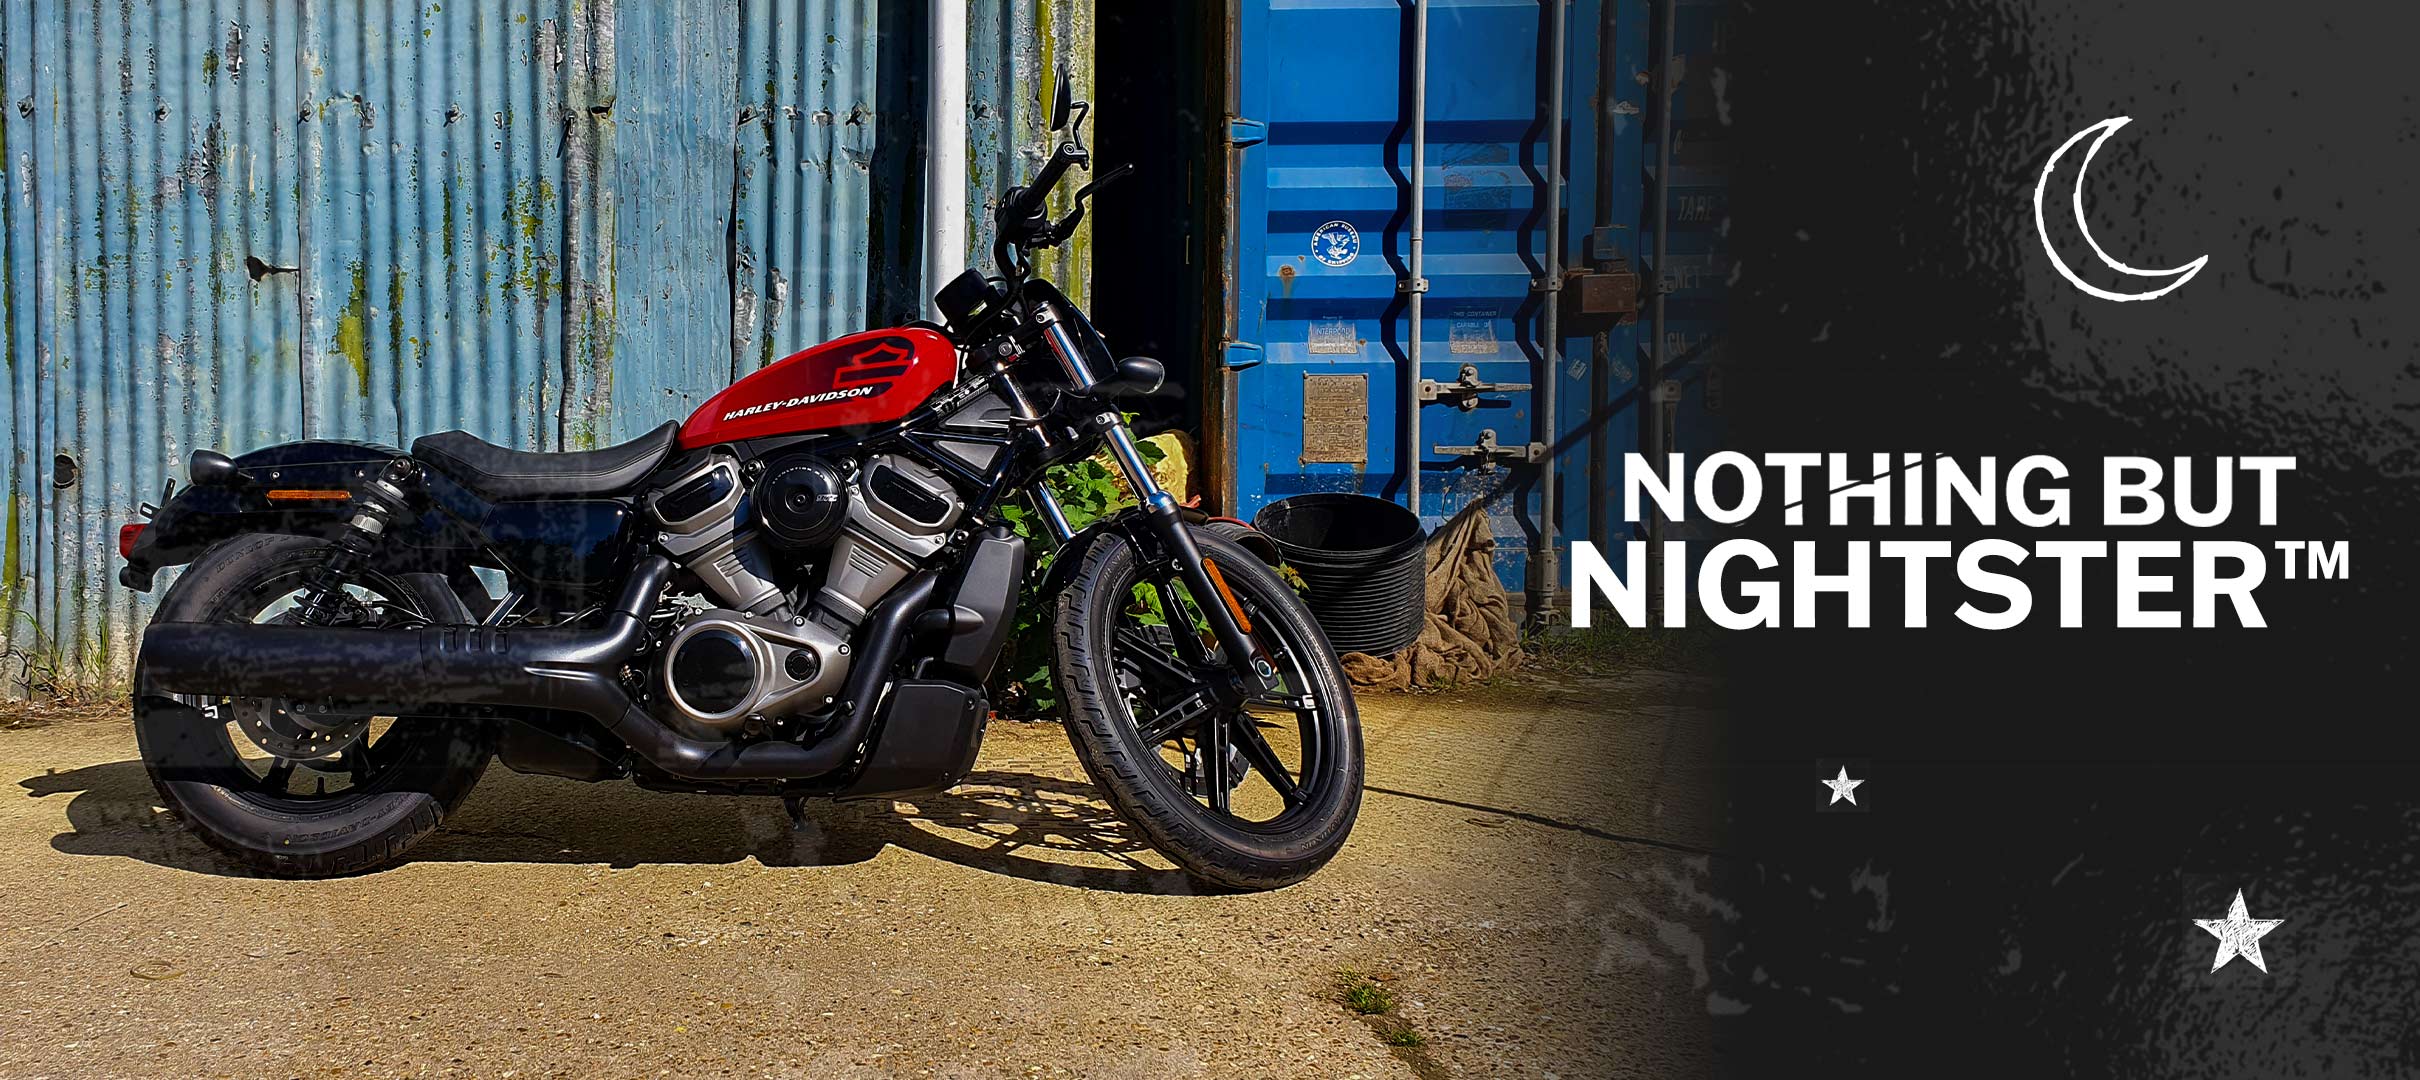 The All-new Harley-Davidson Nightster - Nothing but Nightster - Reasons to Ride